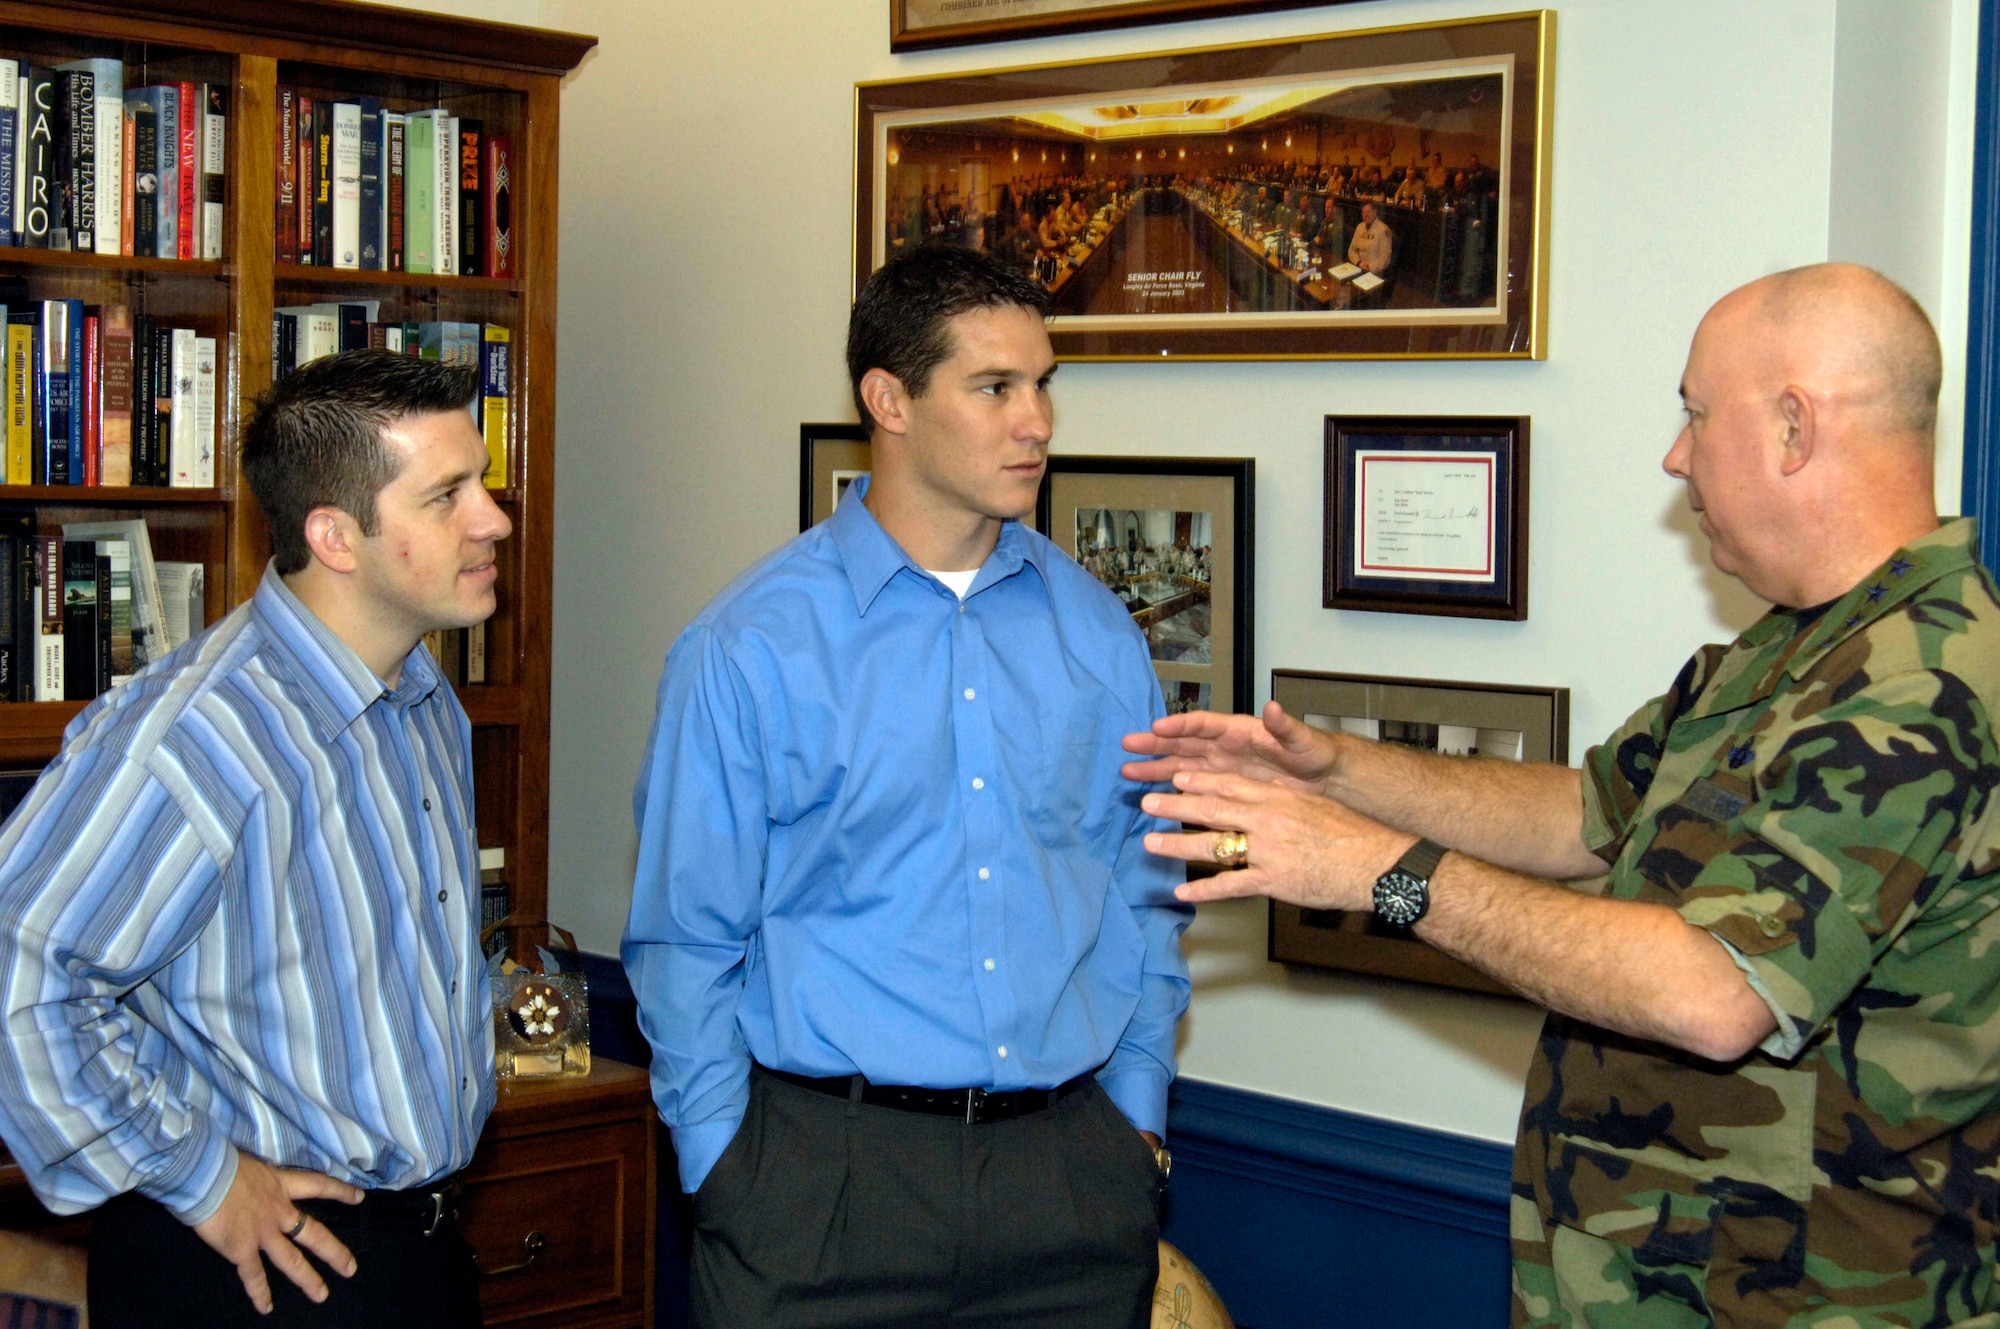 Air Force Chief of Staff Gen. T. Michael Moseley talks with Matt Zitzlsperger and Matt Rillos of Team Air Force from the "Treasure Hunters" reality television show during their visit to the Pentagon Sept. 7. (U.S. Air Force photo/Tech. Sgt. Cohen A. Young)